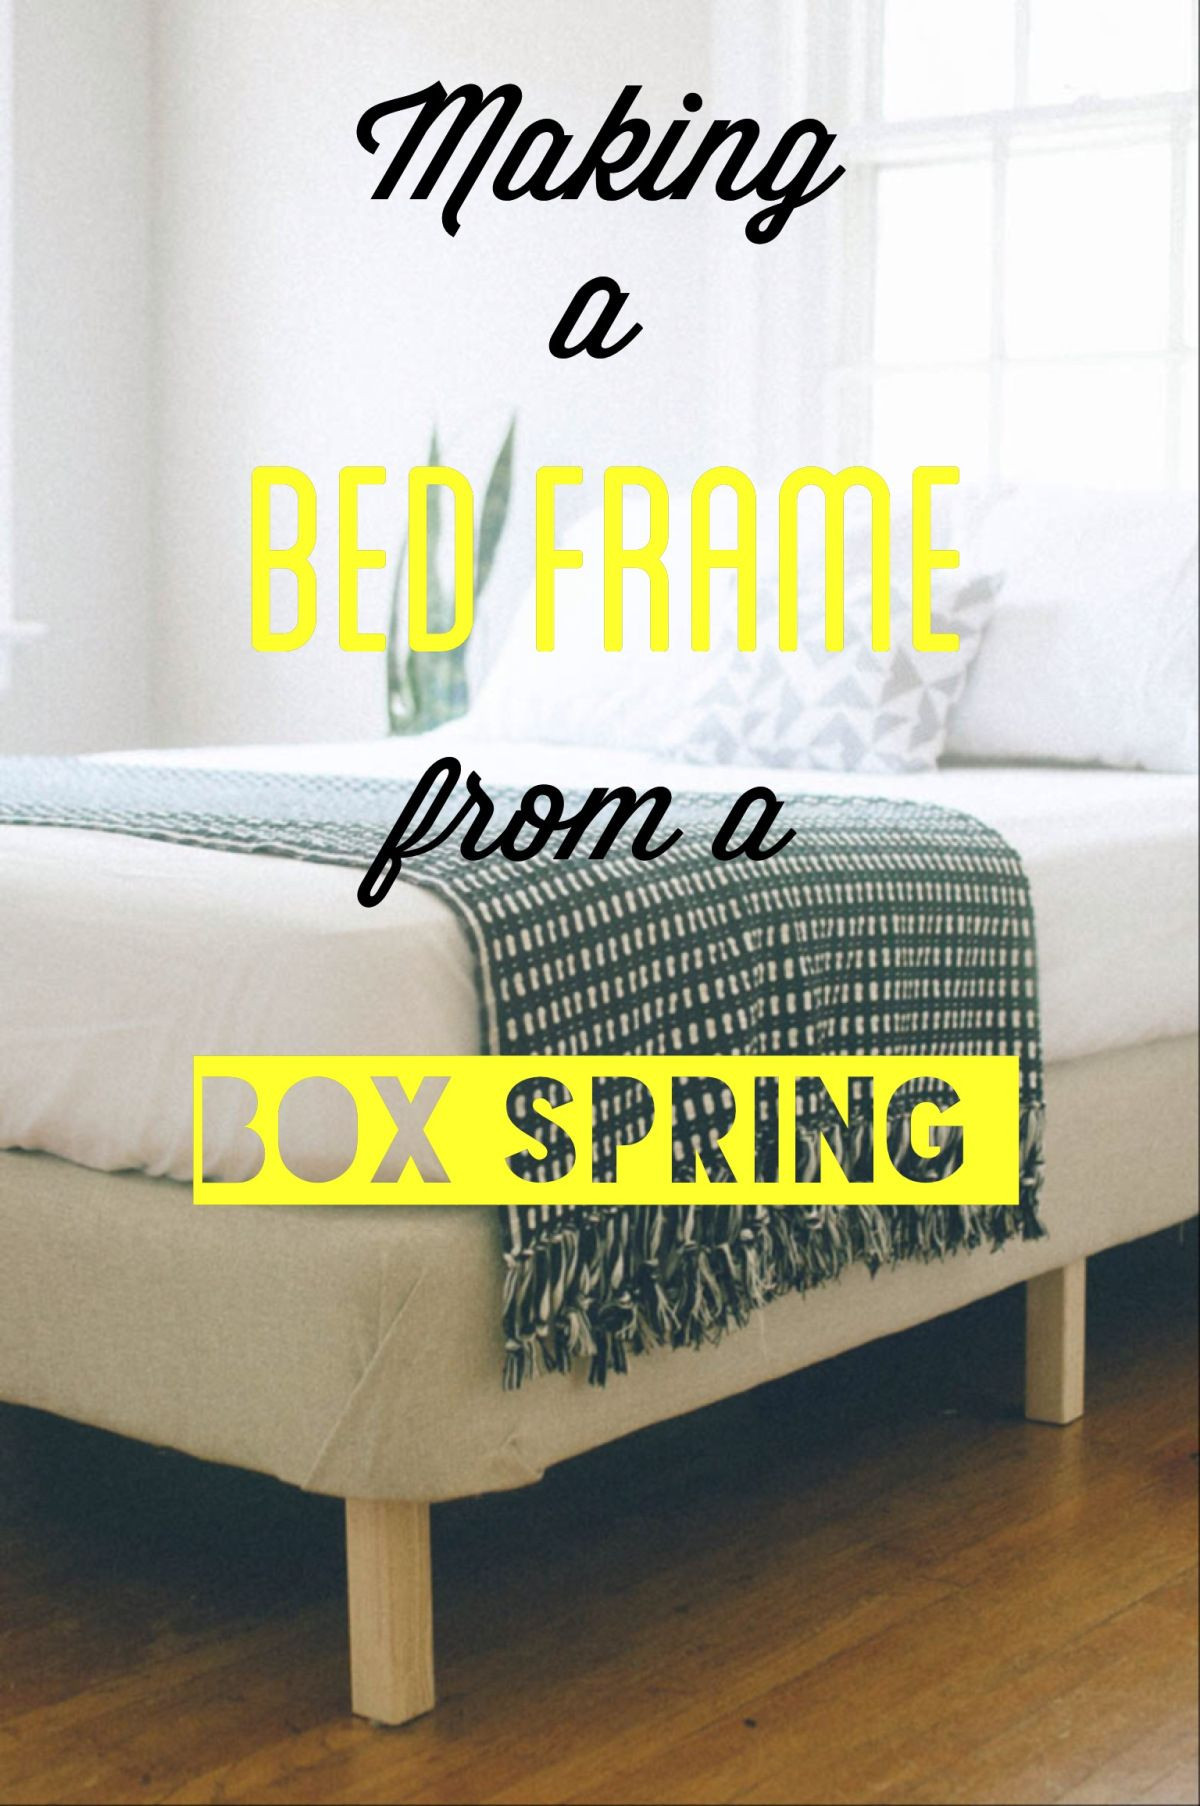 DIY Box Spring Bed Frame
 DIY bed frame by adding simple legs and upholstery to box